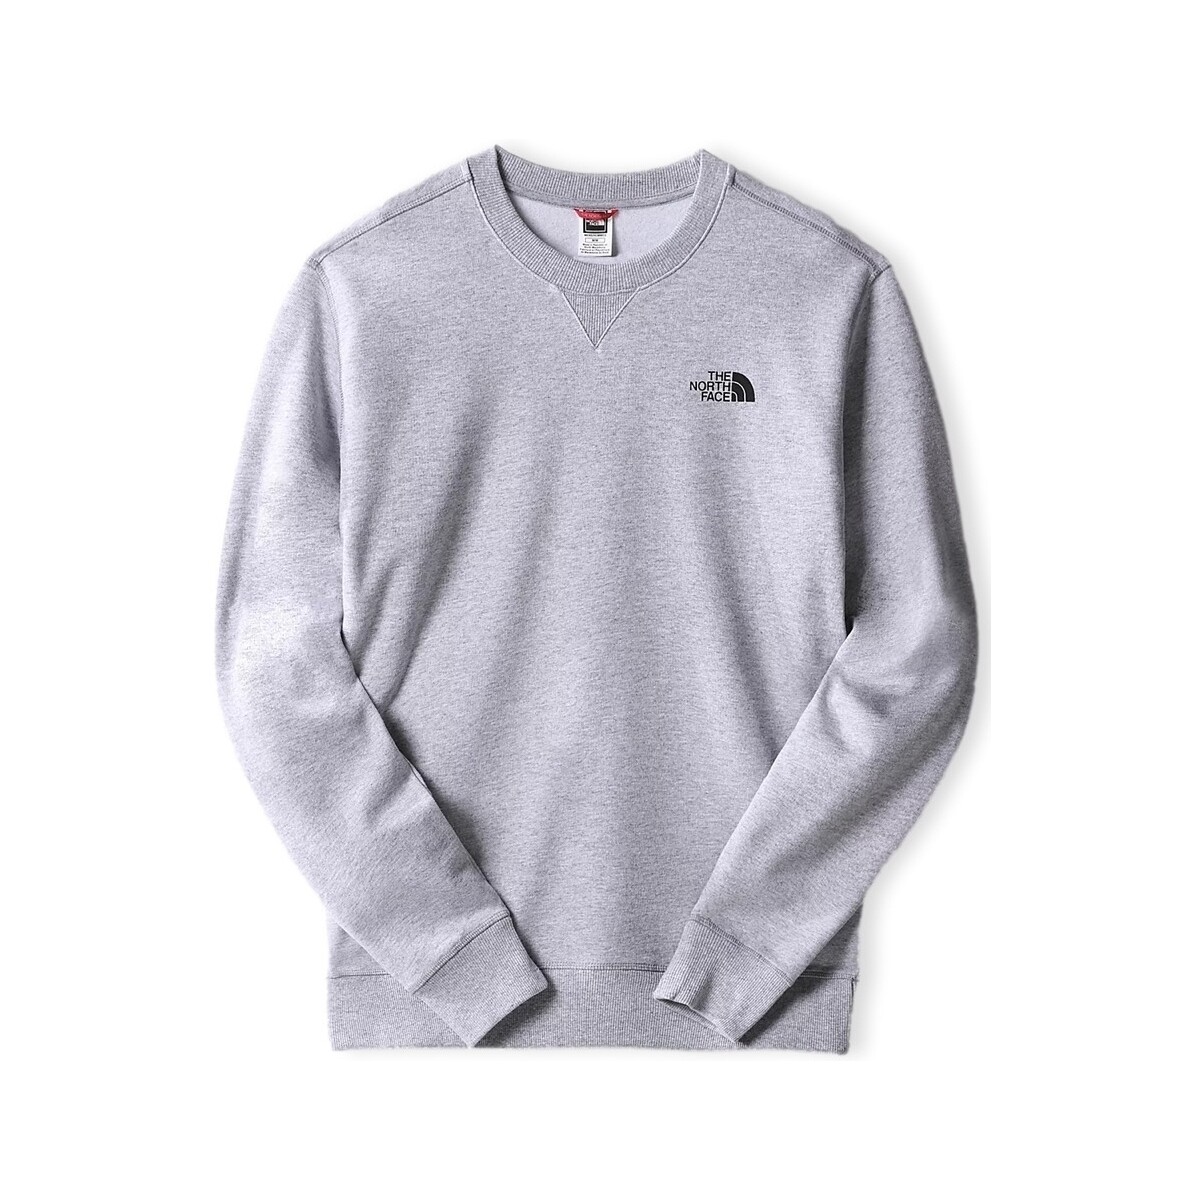 textil Hombre Sudaderas The North Face Simple Dome Sweatshirt - Light Grey Heather Gris